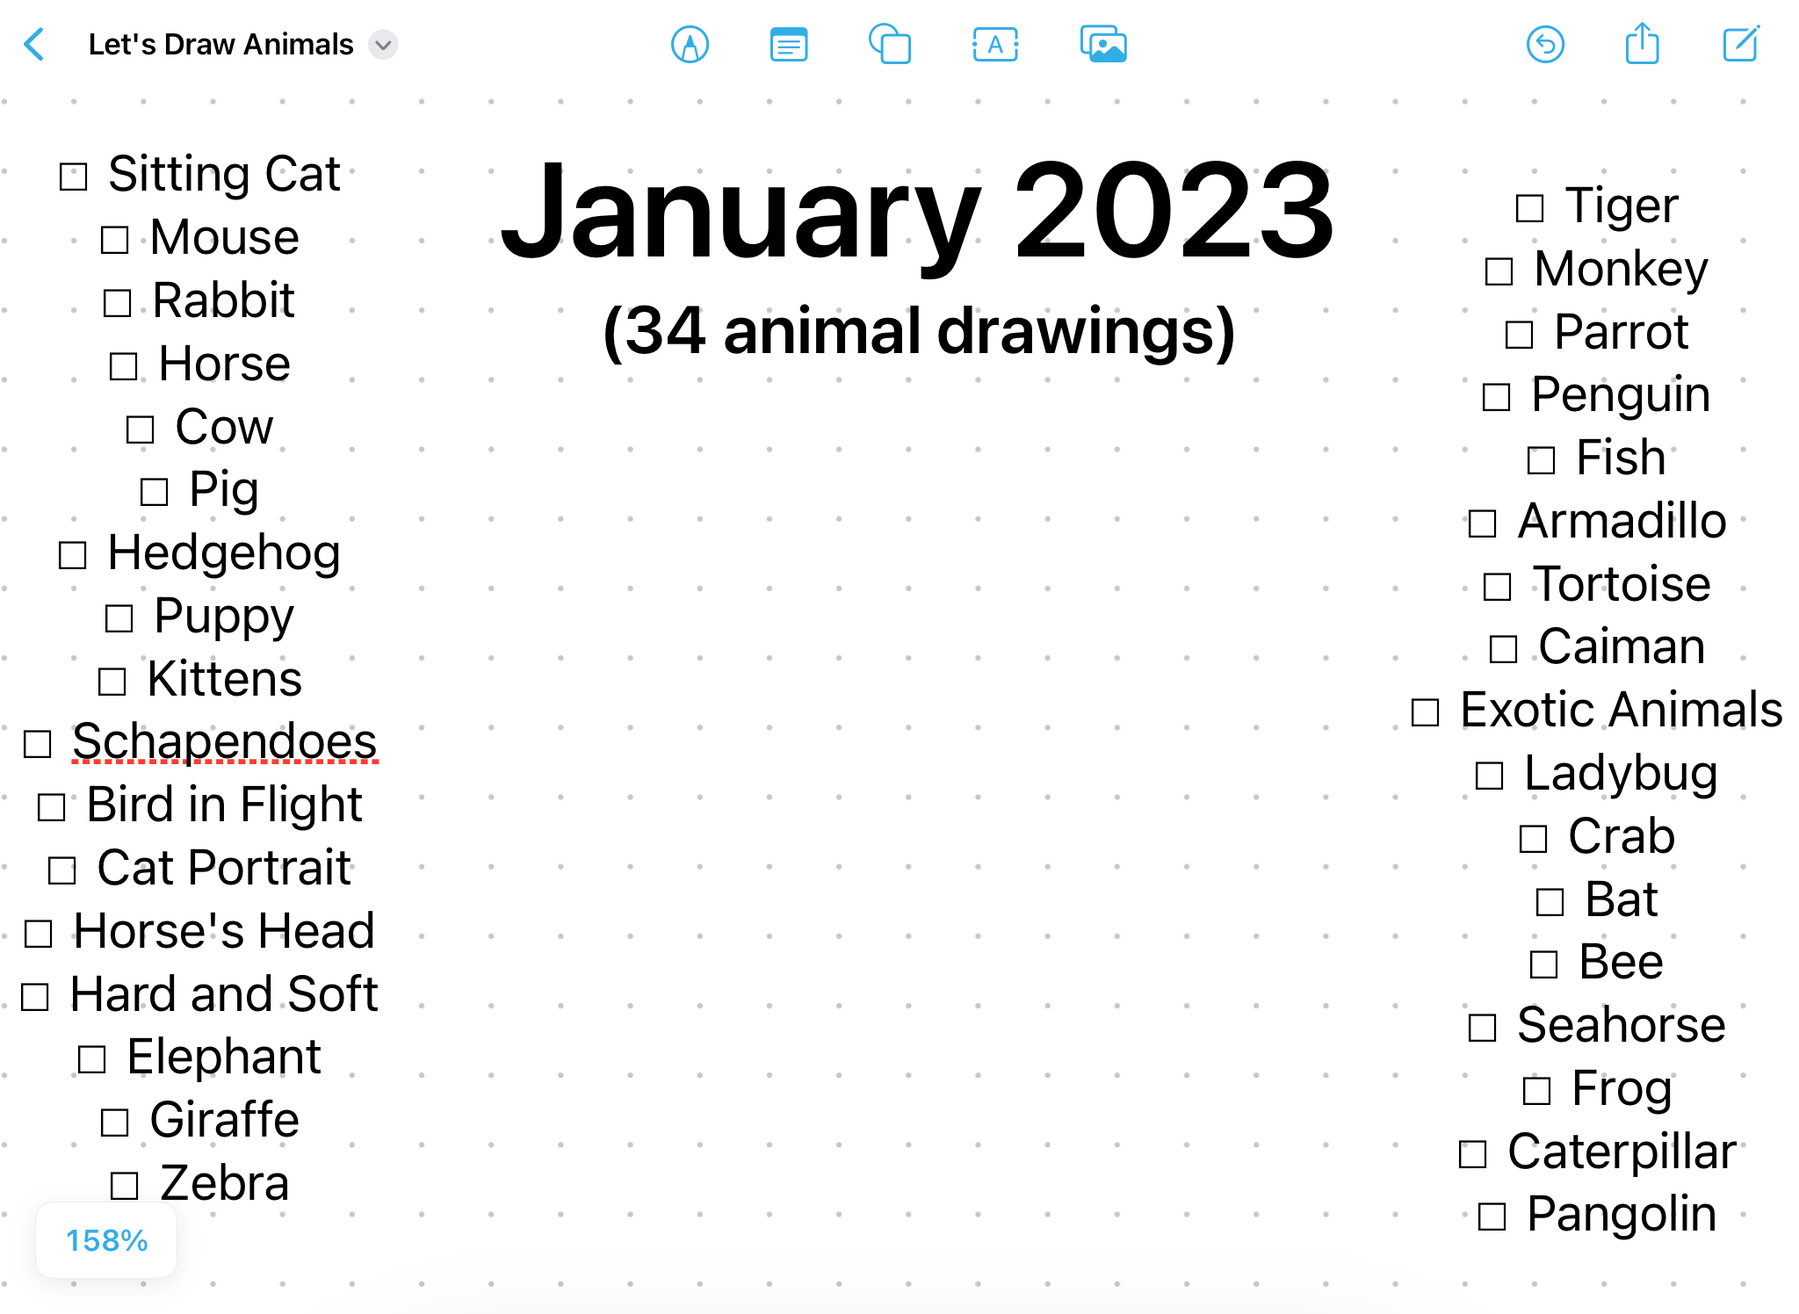 Freeform board for January 2023 with 34 drawing challenges